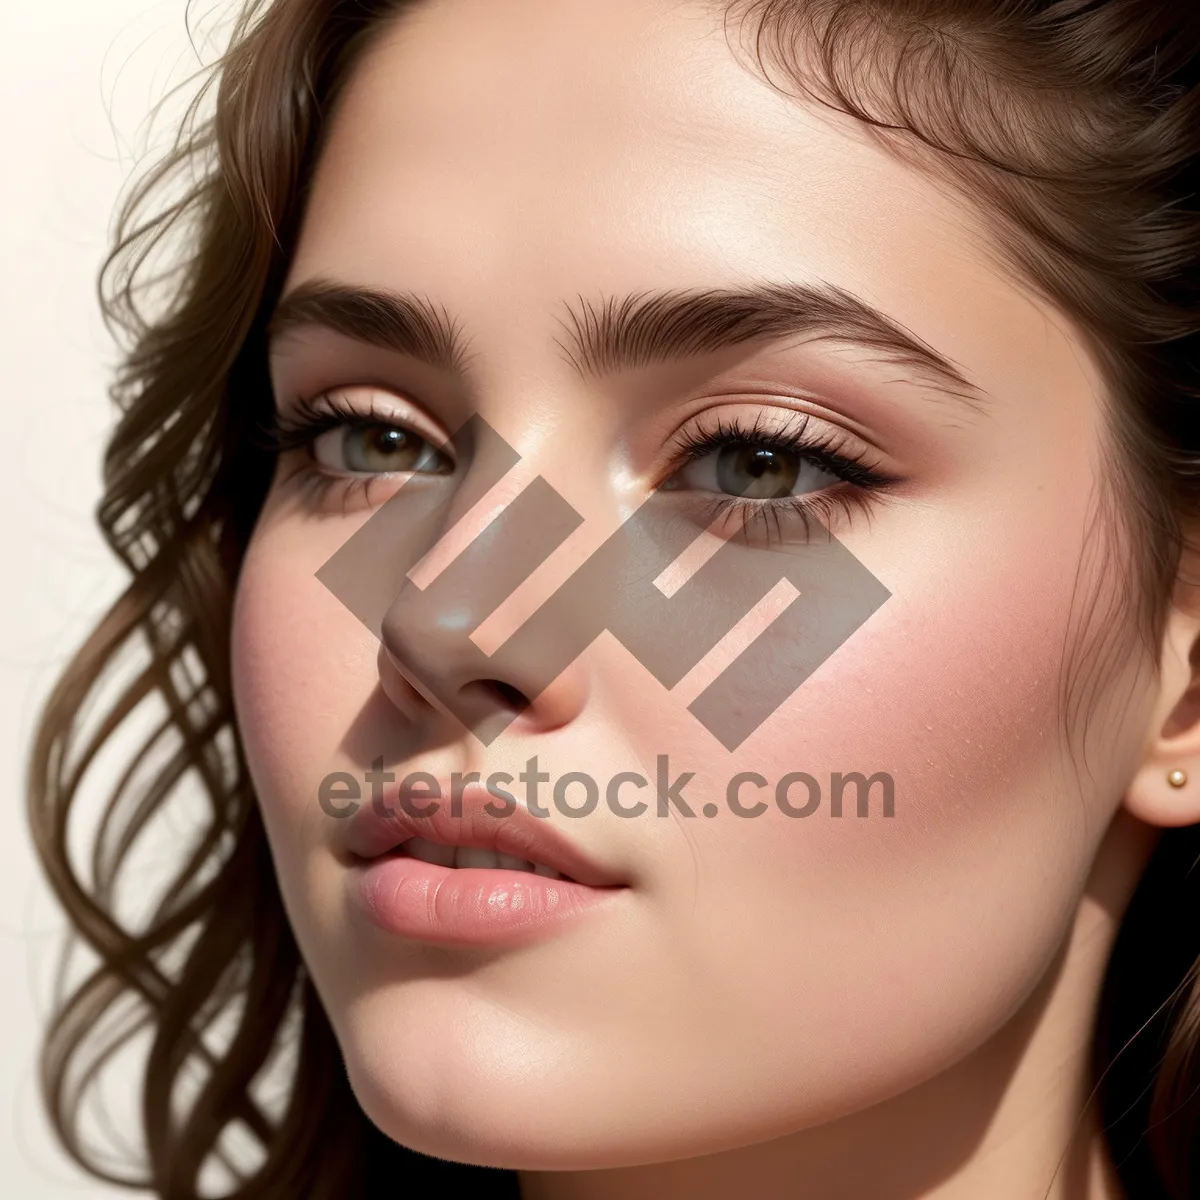 Picture of Stunning Close-up Portrait of Attractive Fashion Model with Gorgeous Smile